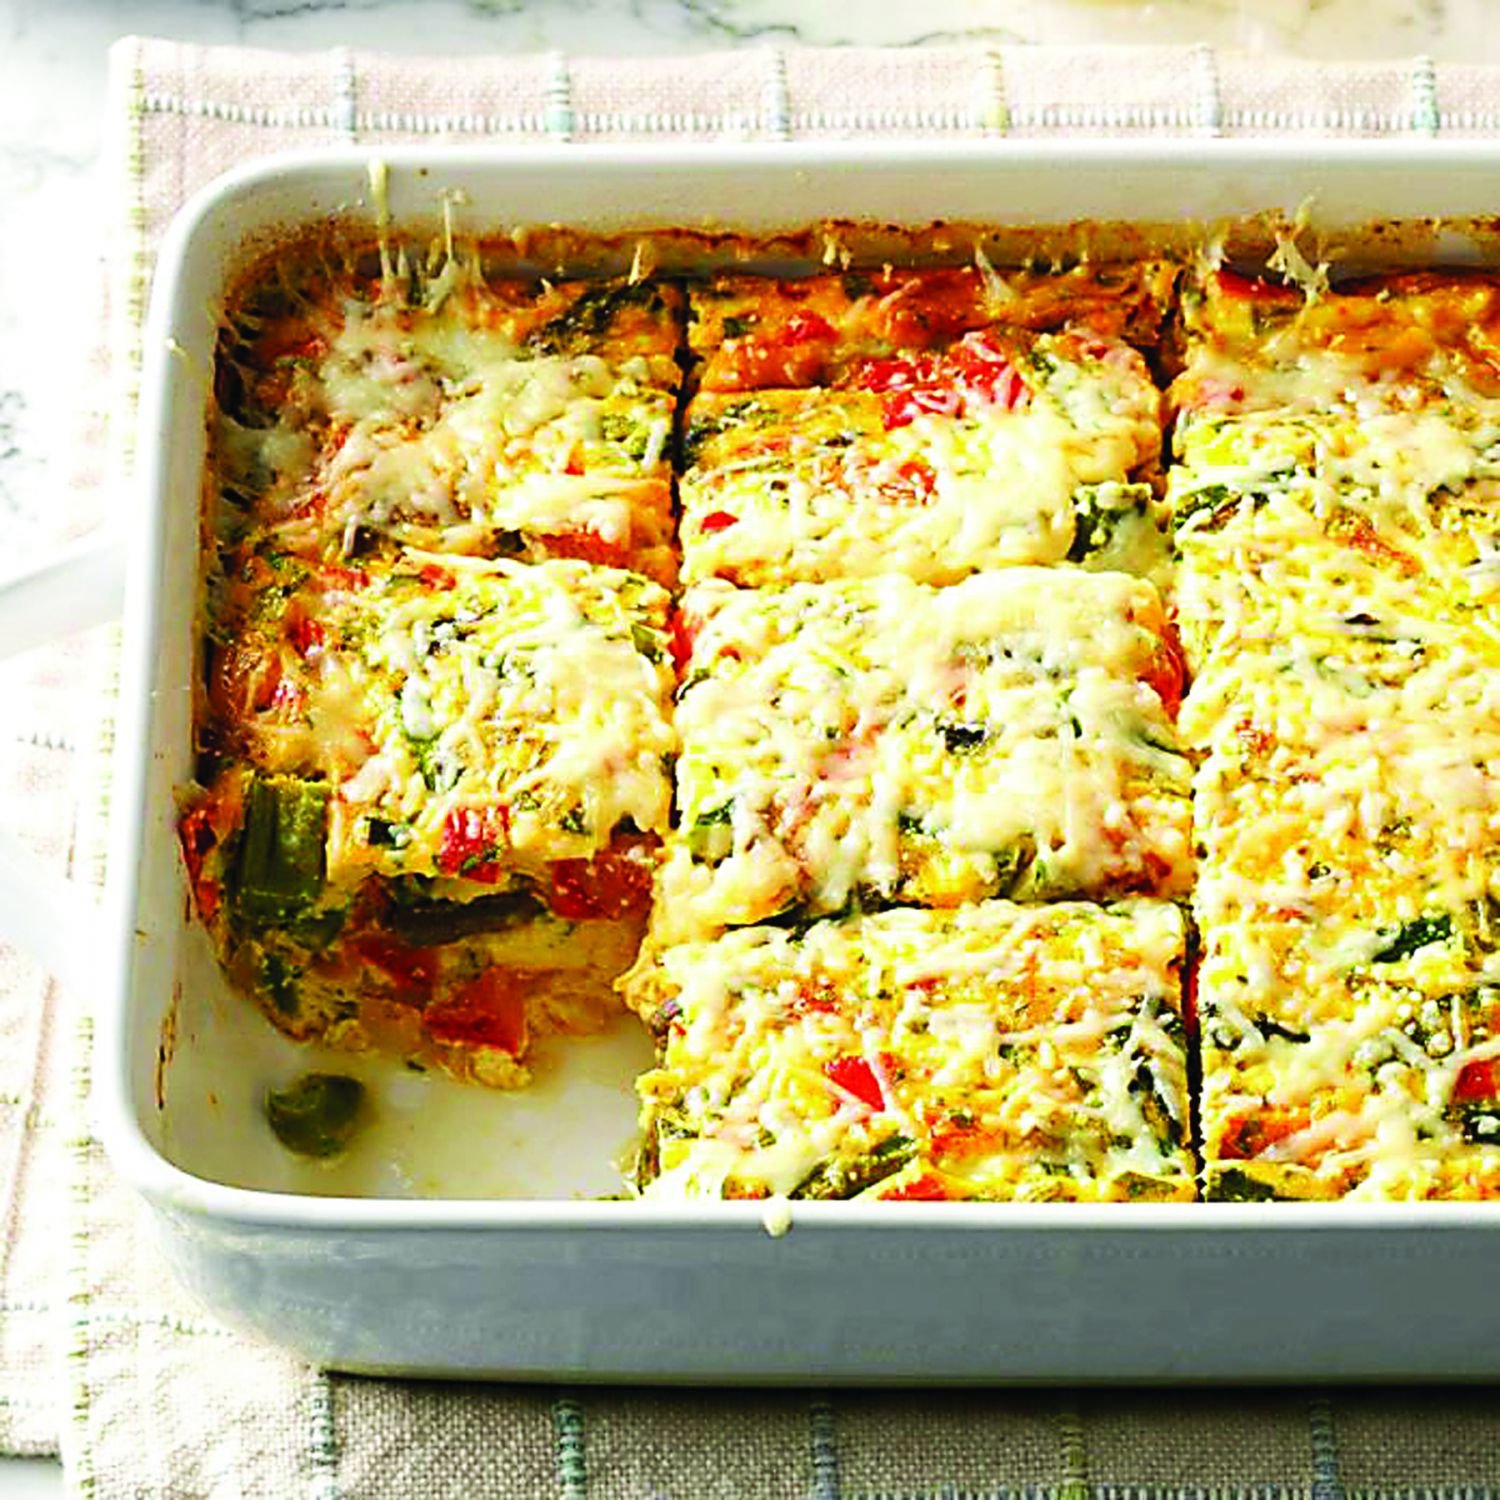 A frittata is an easy weeknight supper for Lent or any time you want breakfast for dinner. Photograph courtesy of tasteofhome.com.